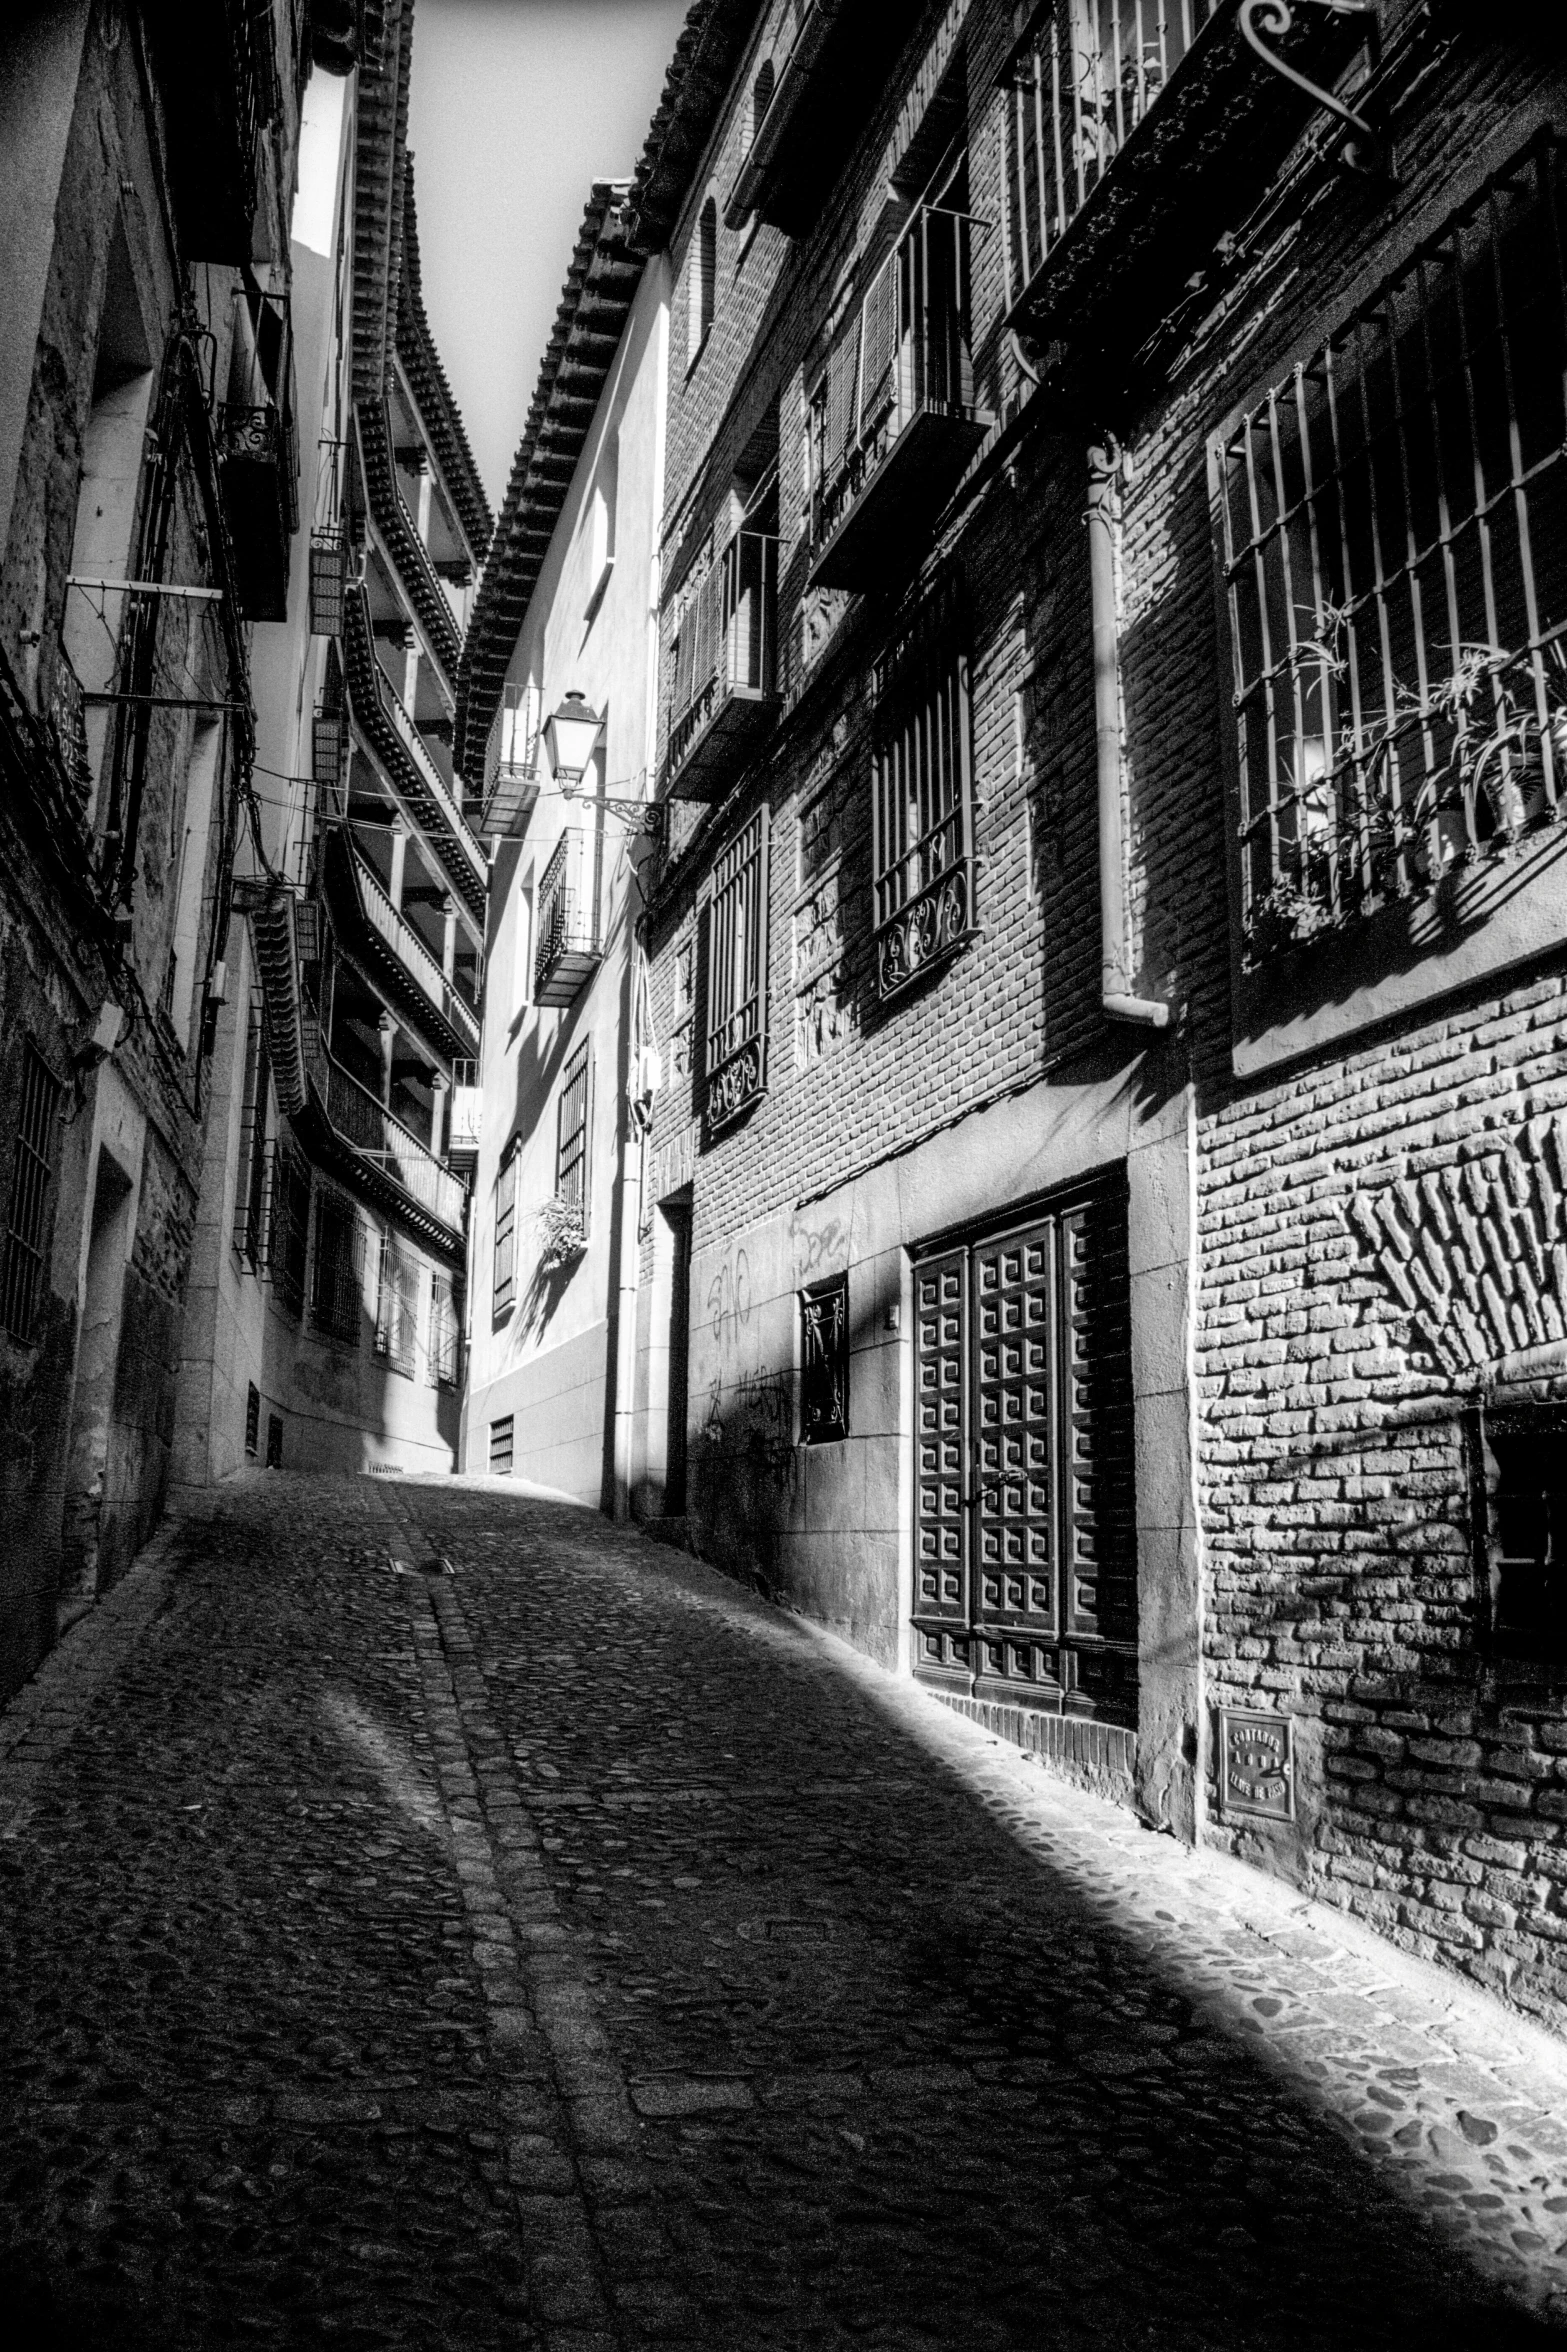 black and white pograph of an alley way in a city